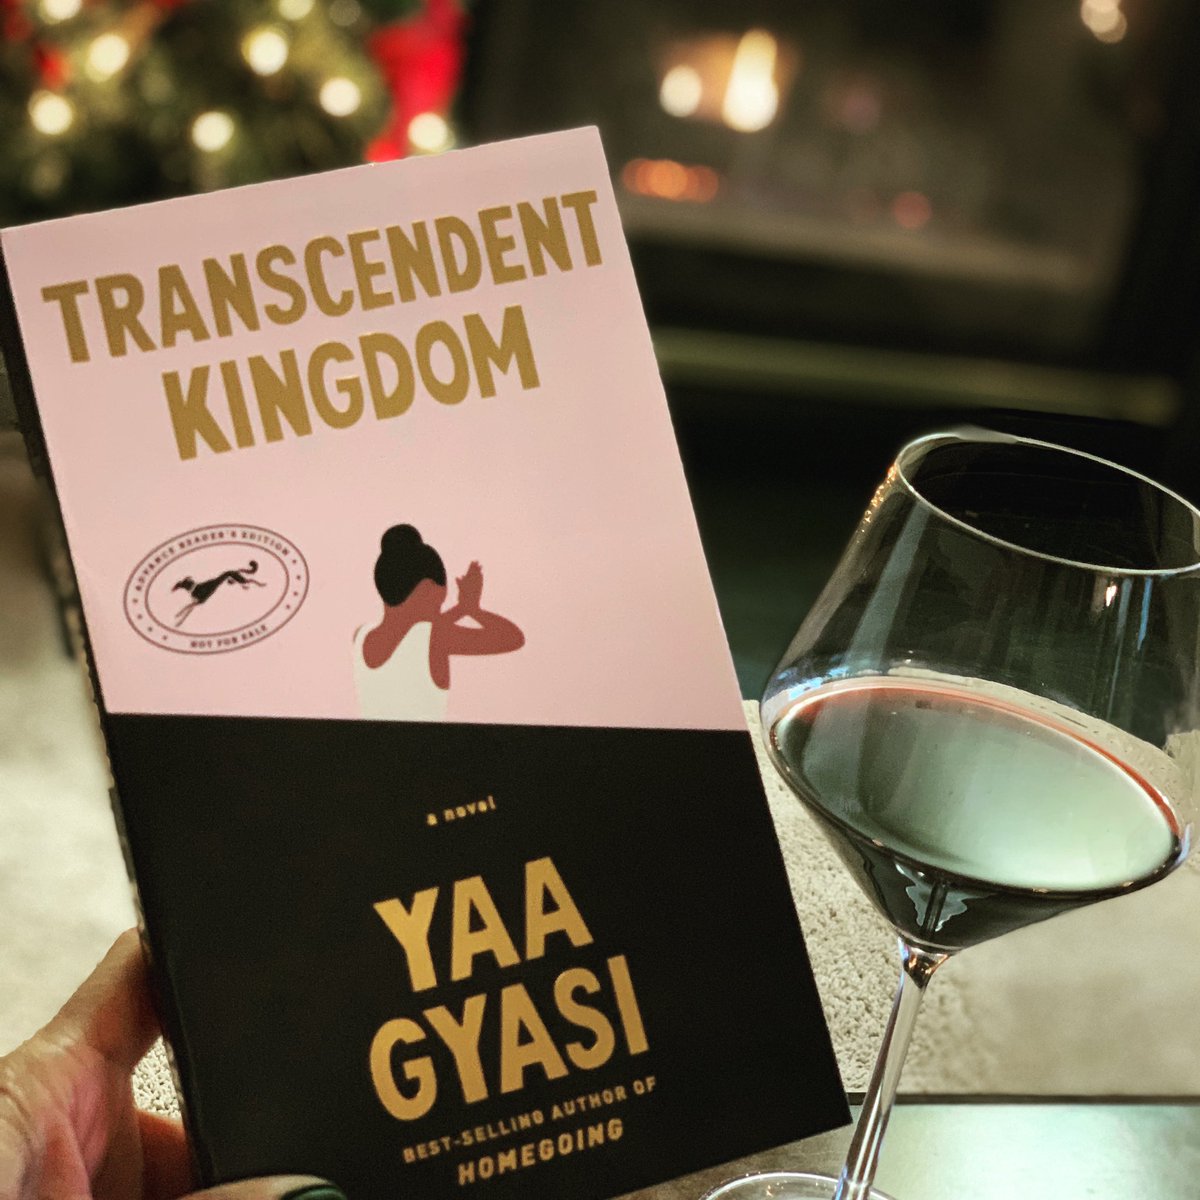 OMG! Did y’all just hear me scream?! Yep it was pretty loud 😅 Homegoing is one of my favorite novels & I recommend it to everyone. So I am out of my mind to have #TranscendentKingdom by #YaaGyasi in my hands! 👏🏽🙌🏽💃🏽 Coming Sept 2020
📚🍷
#spinesvines #diversespines #newbooks